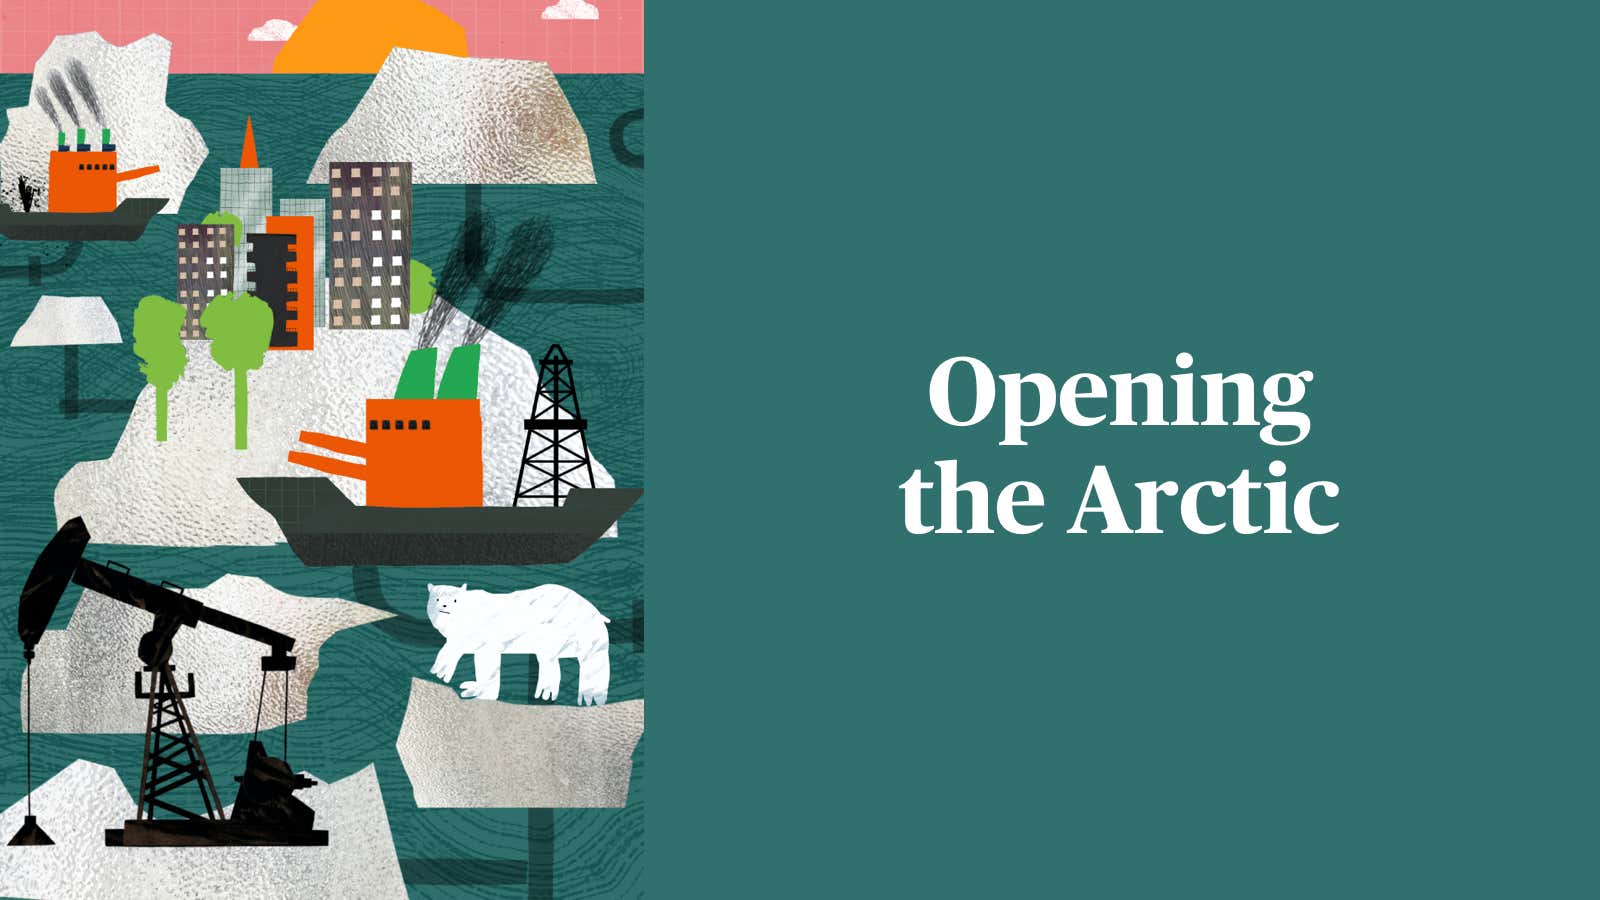 For members—Opening the Arctic